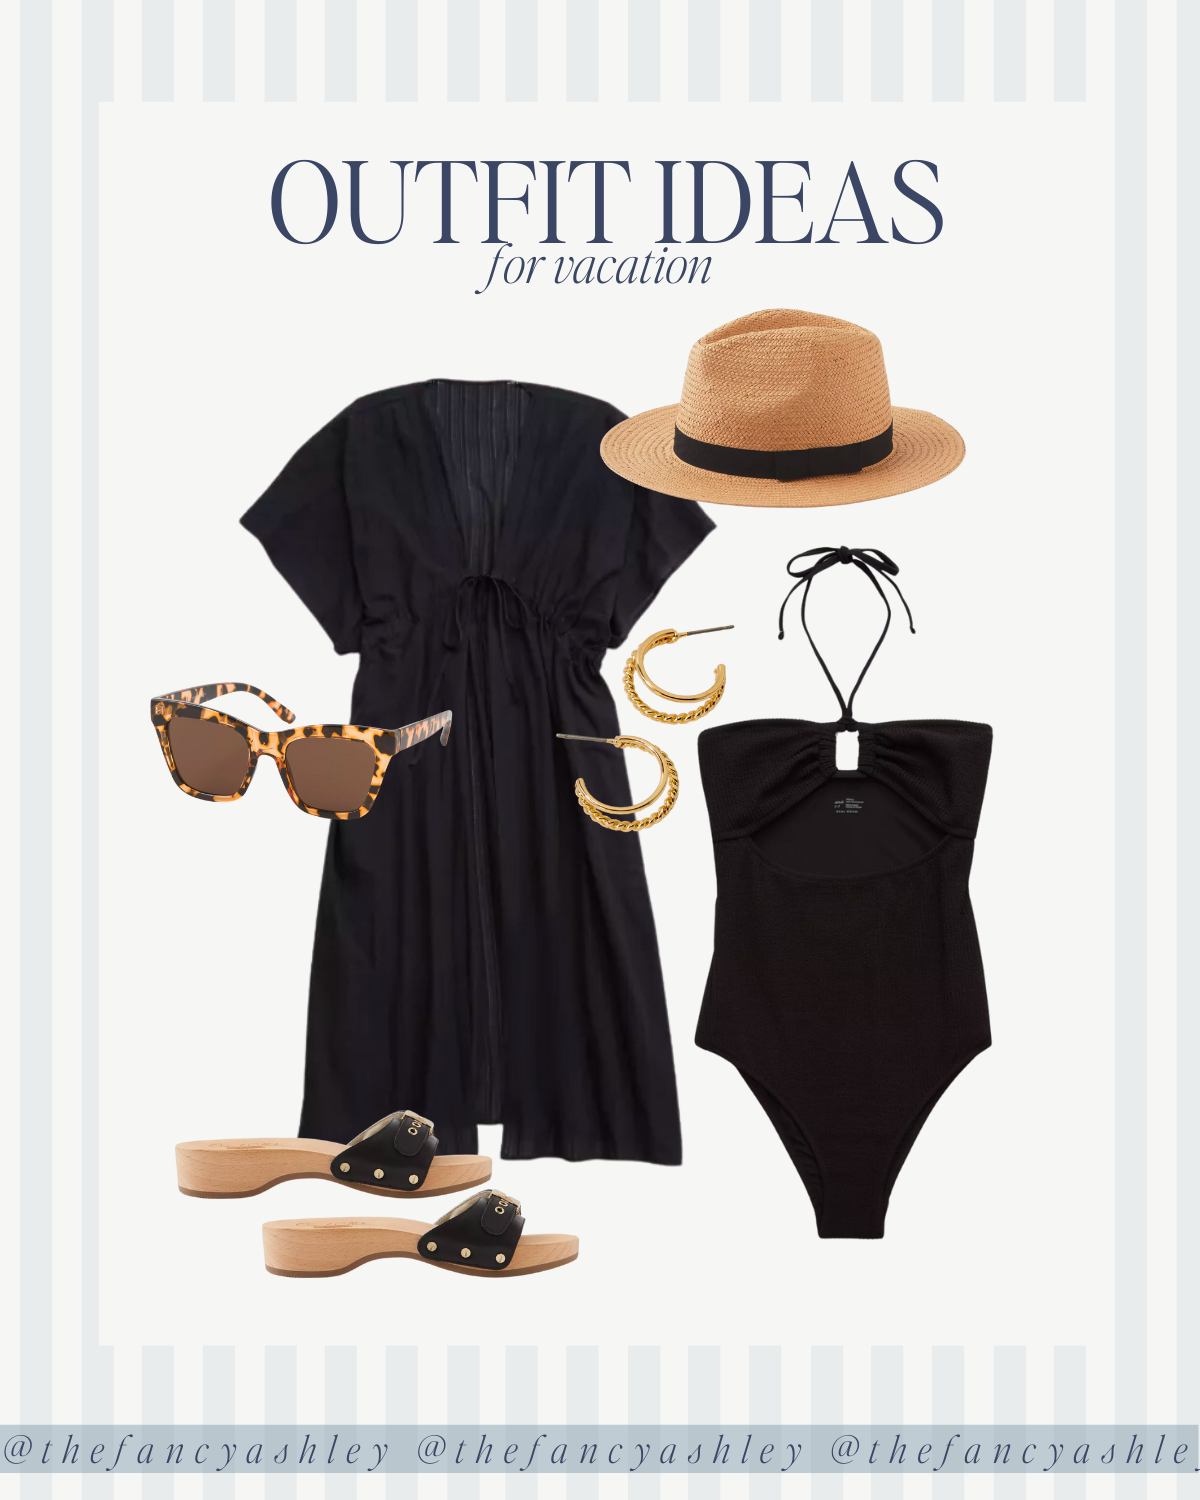 4 Vacation Outfit Ideas - House of Fancy